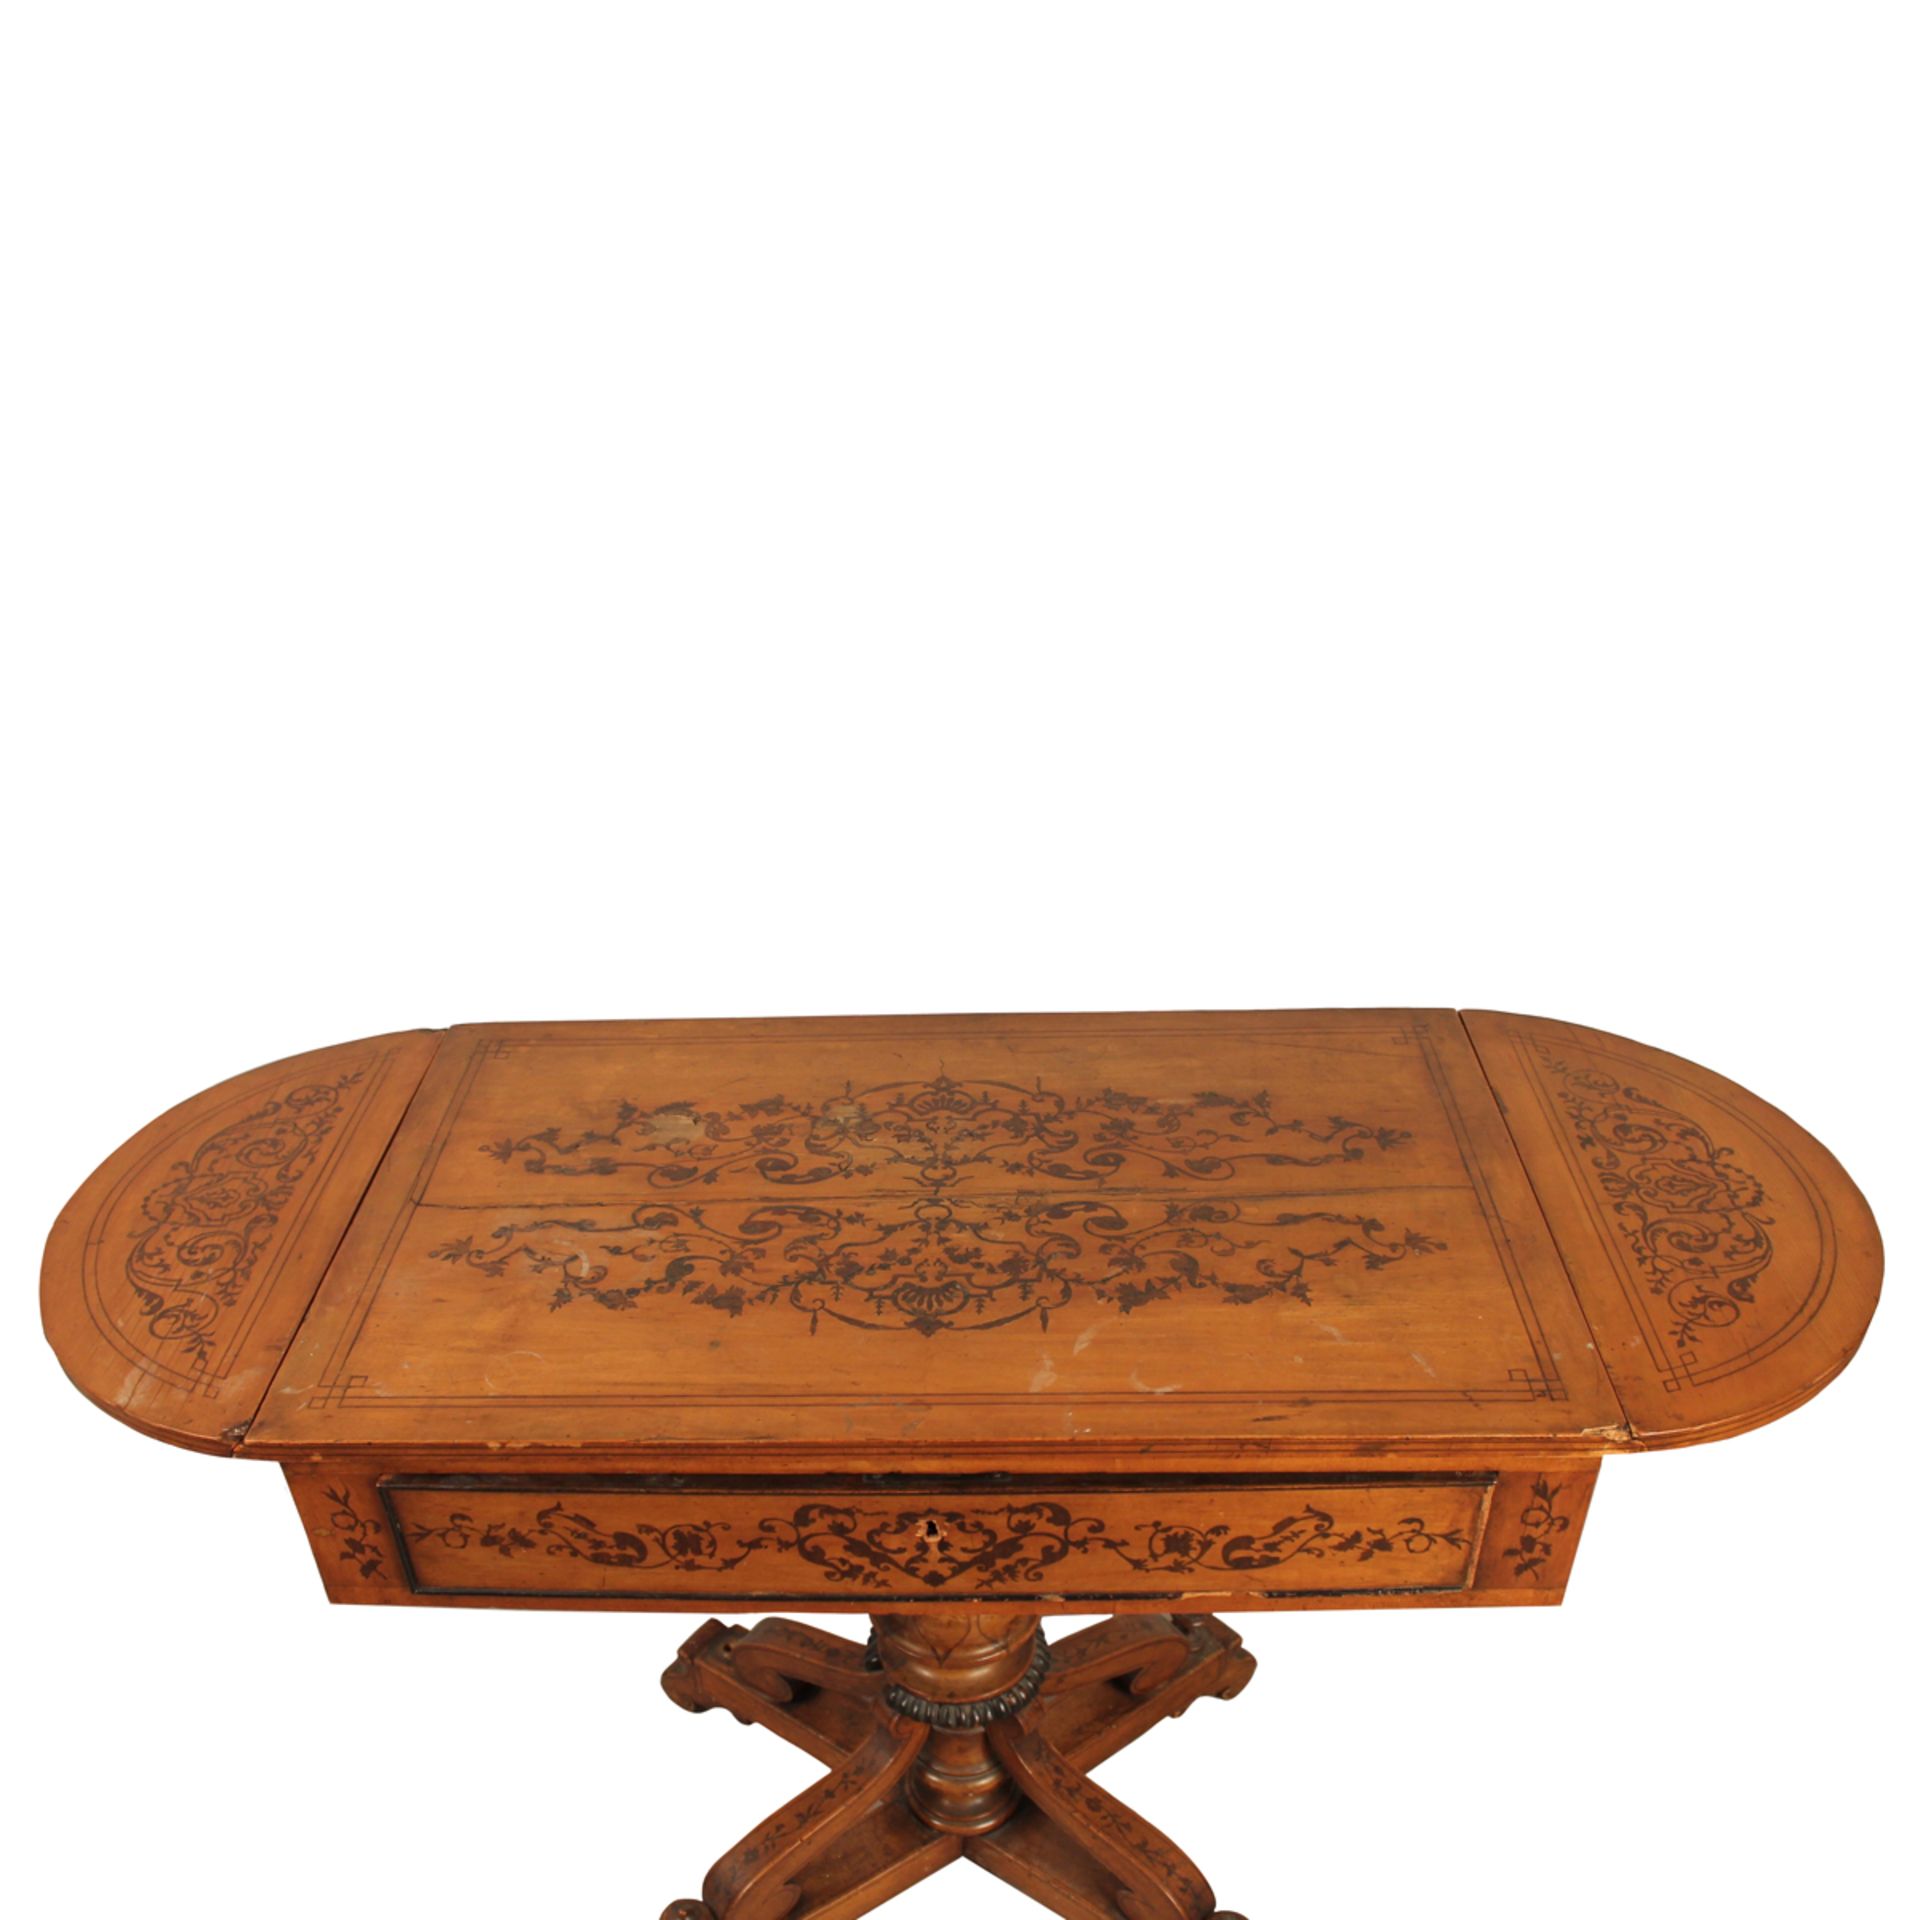 TAVOLINO RETTANGOLARE CON BANDELLE LATERALI- RECTANGULAR TABLE WITH SIDE BANDS - Image 2 of 2